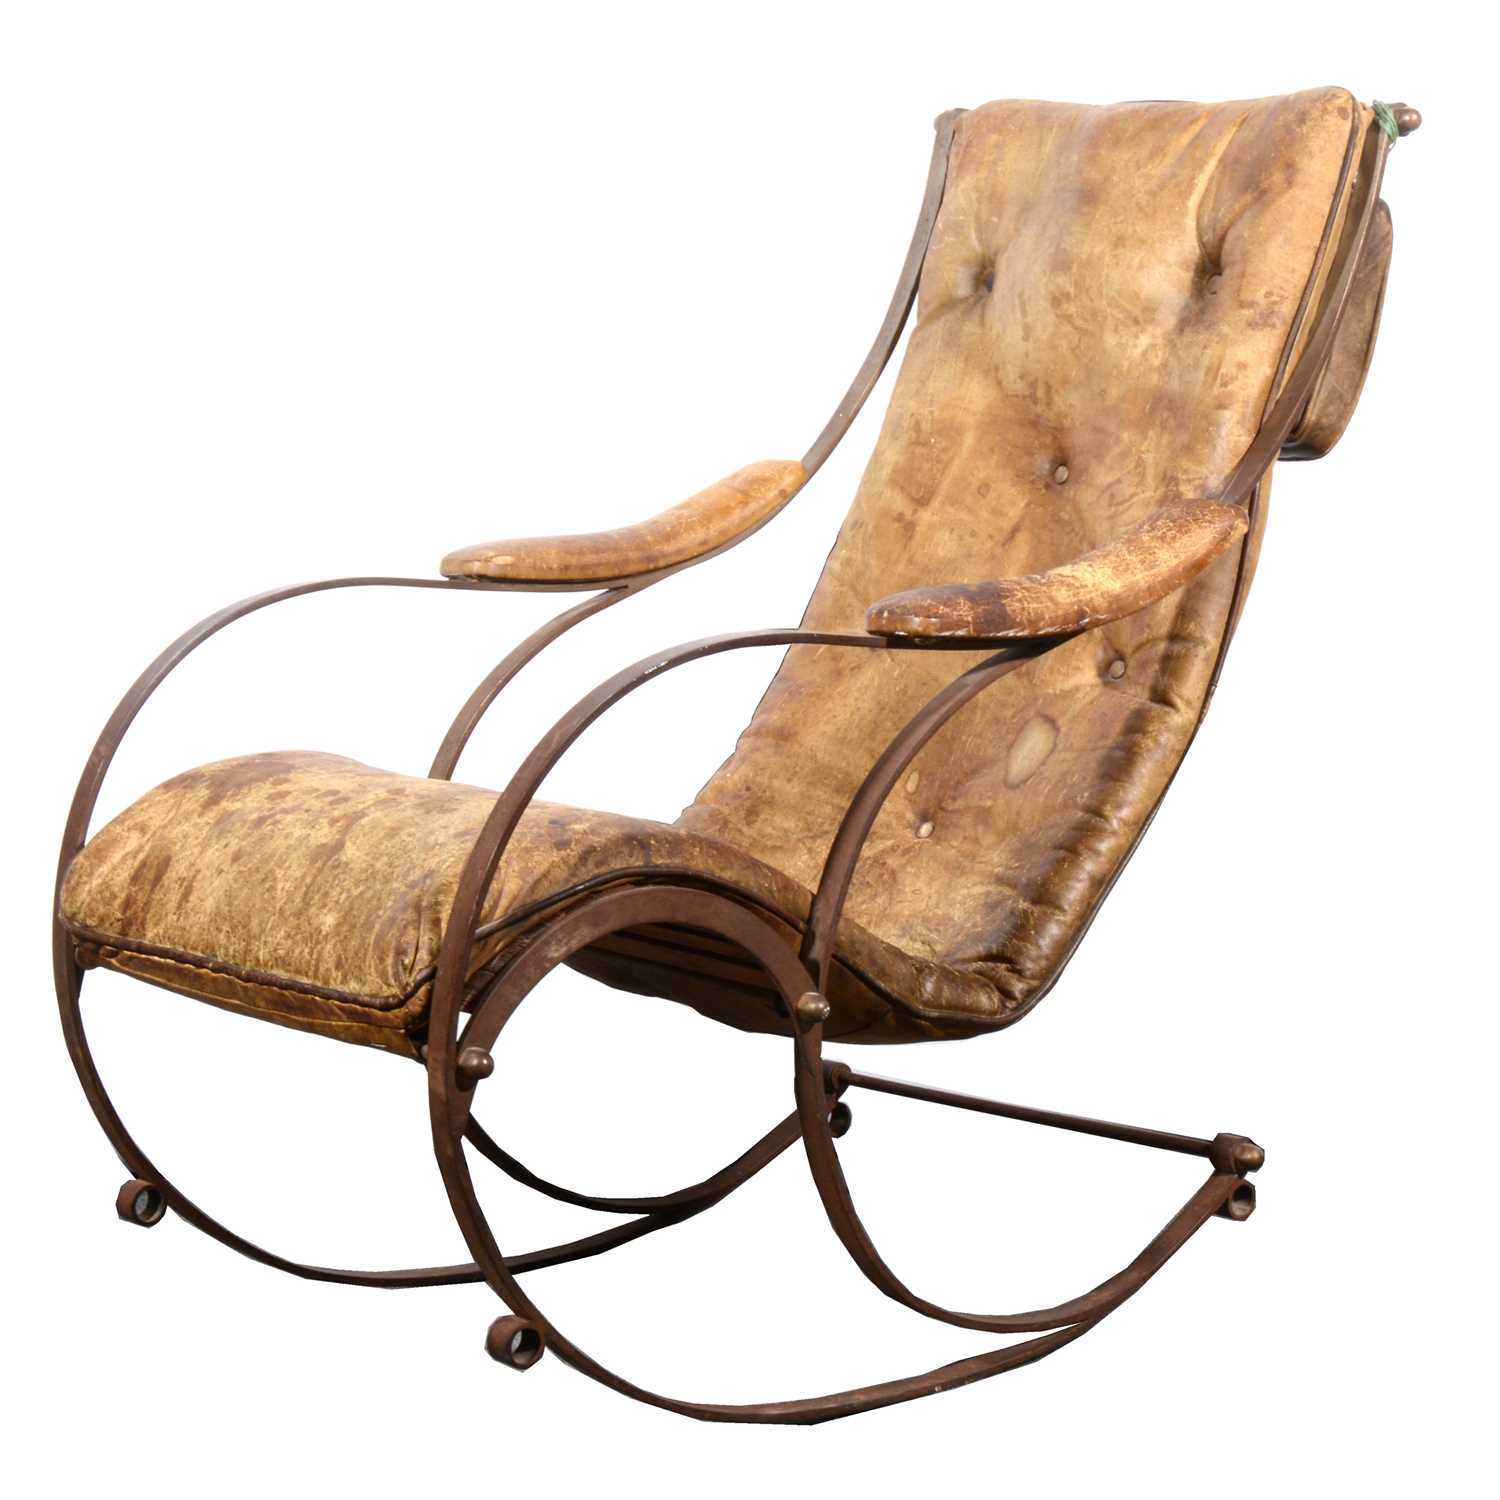 Lot 512 - A Victorian wrought iron and leather rocking chair, in the manner of R W Winfield